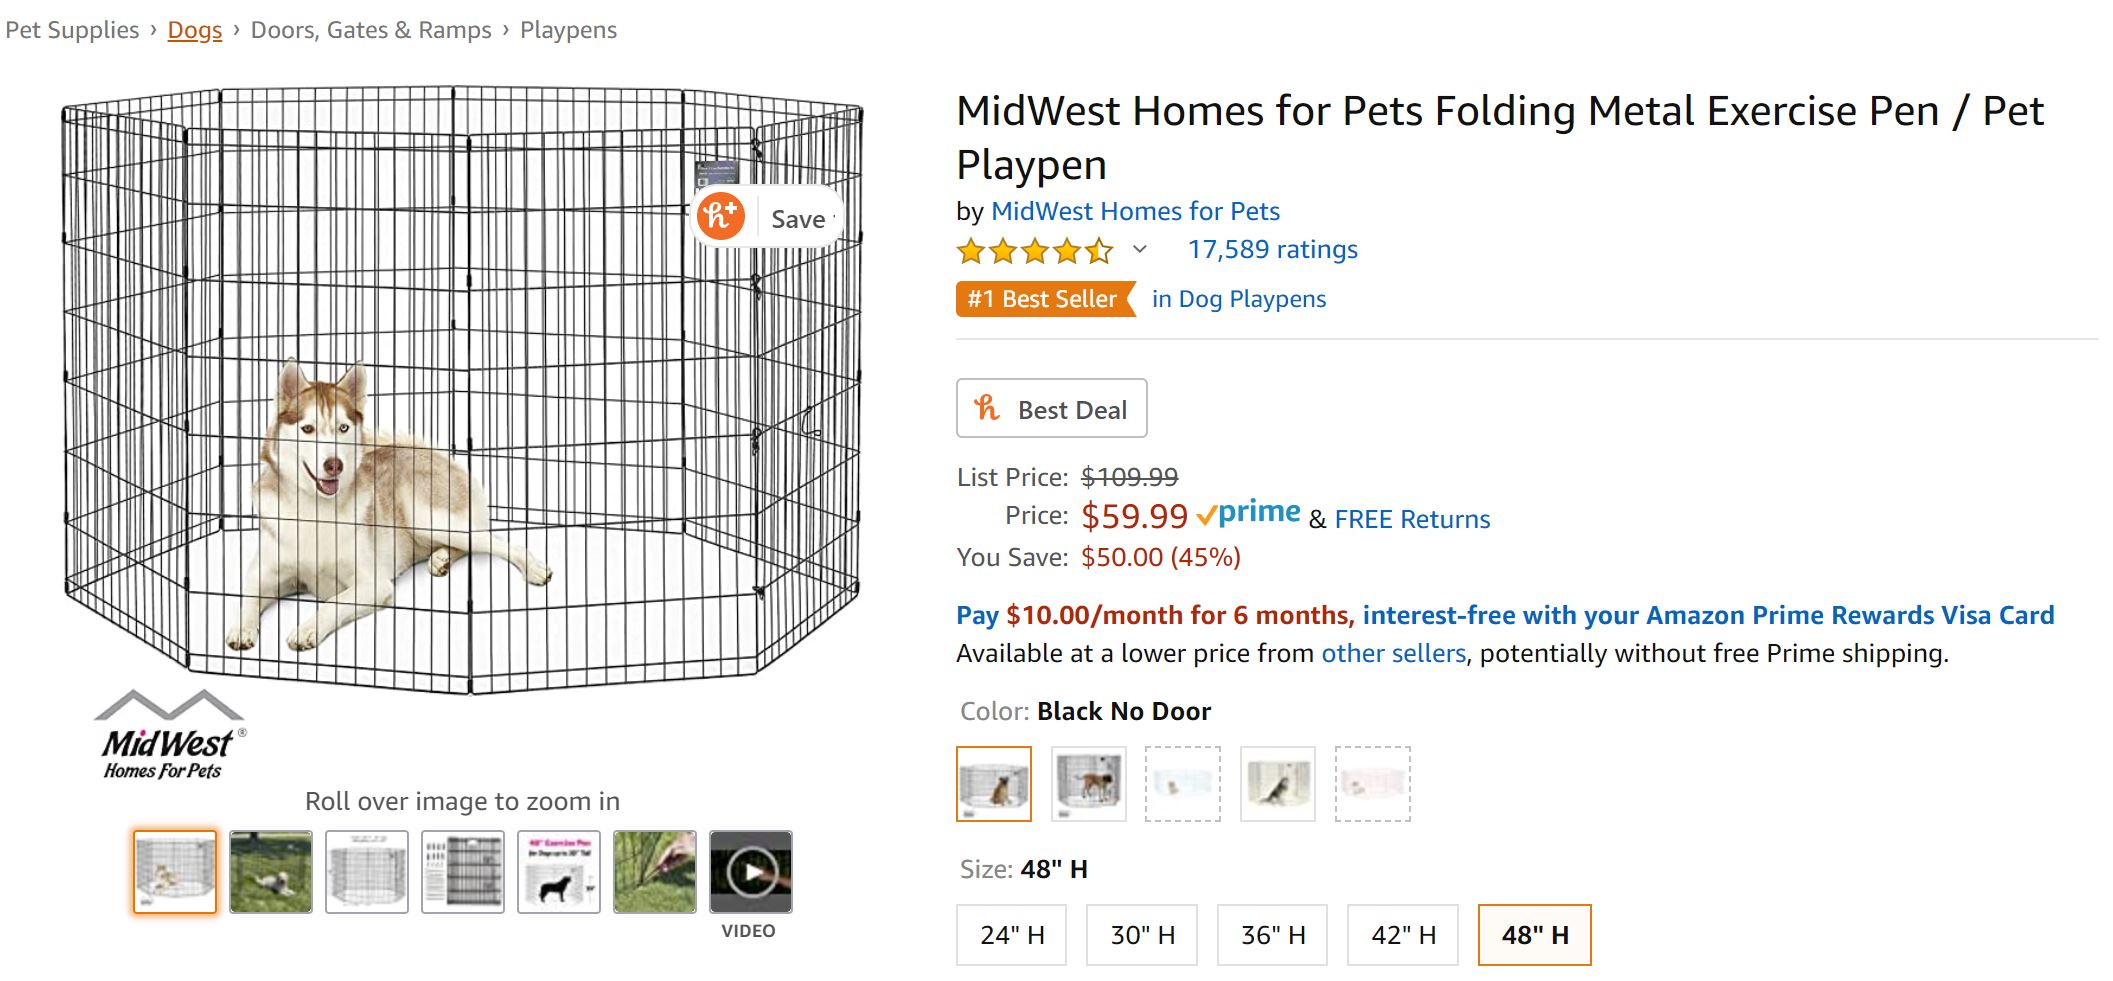 Example of an Exercise Pen You Can Purchase on Amazon.com